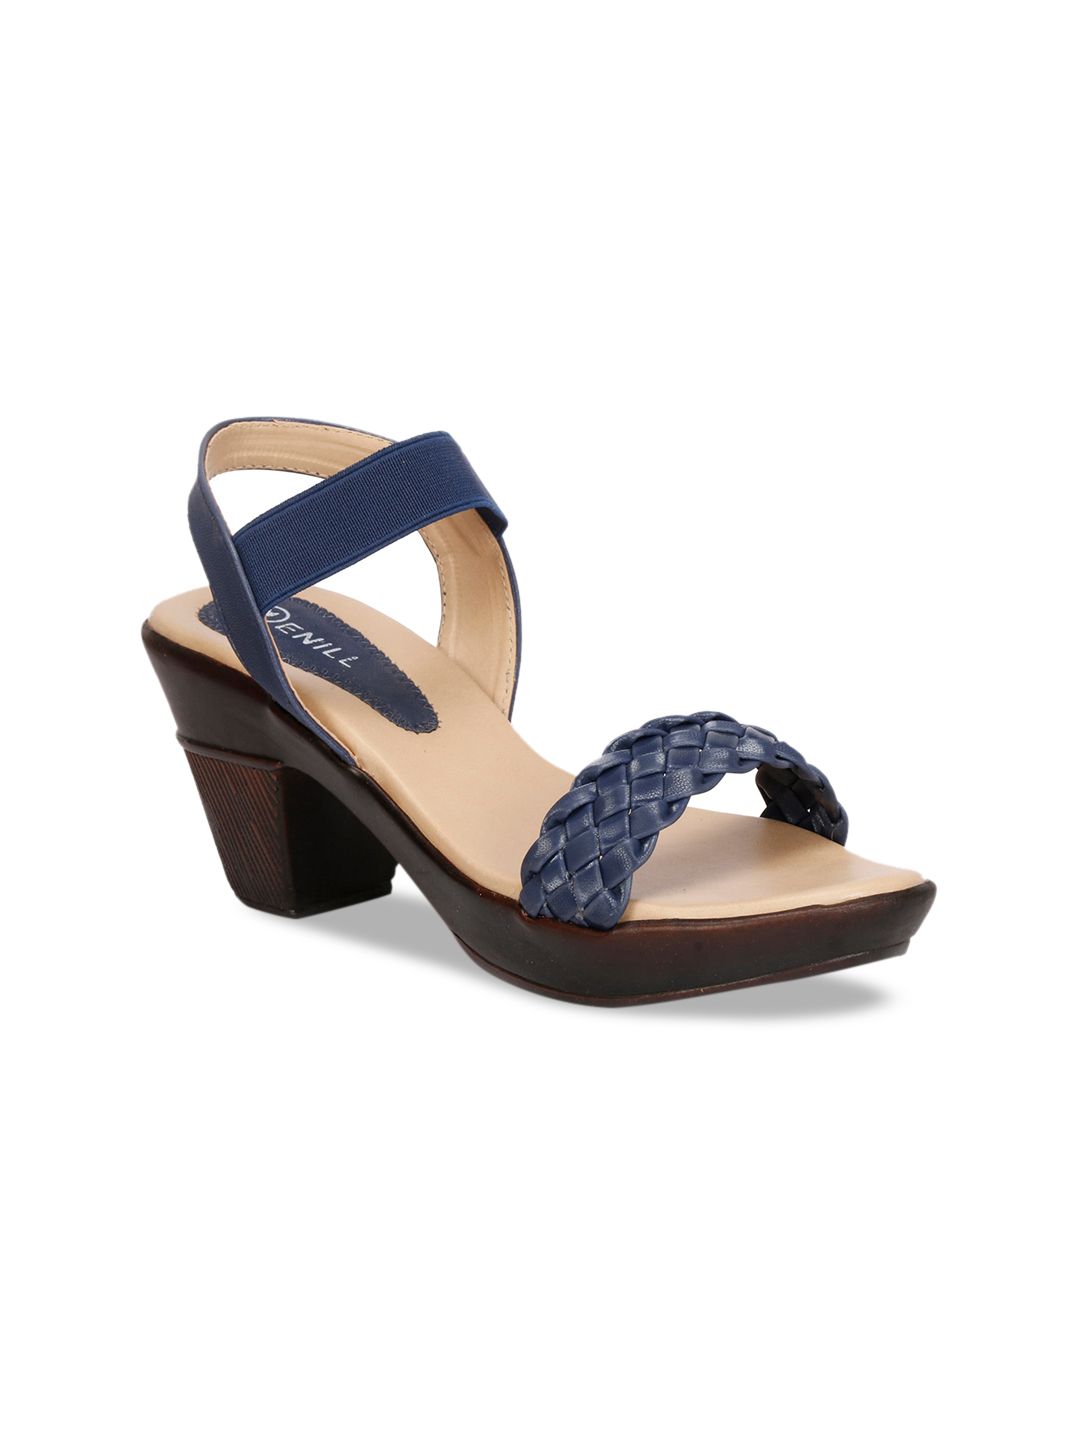 Denill Blue Block Sandals with Buckles Price in India